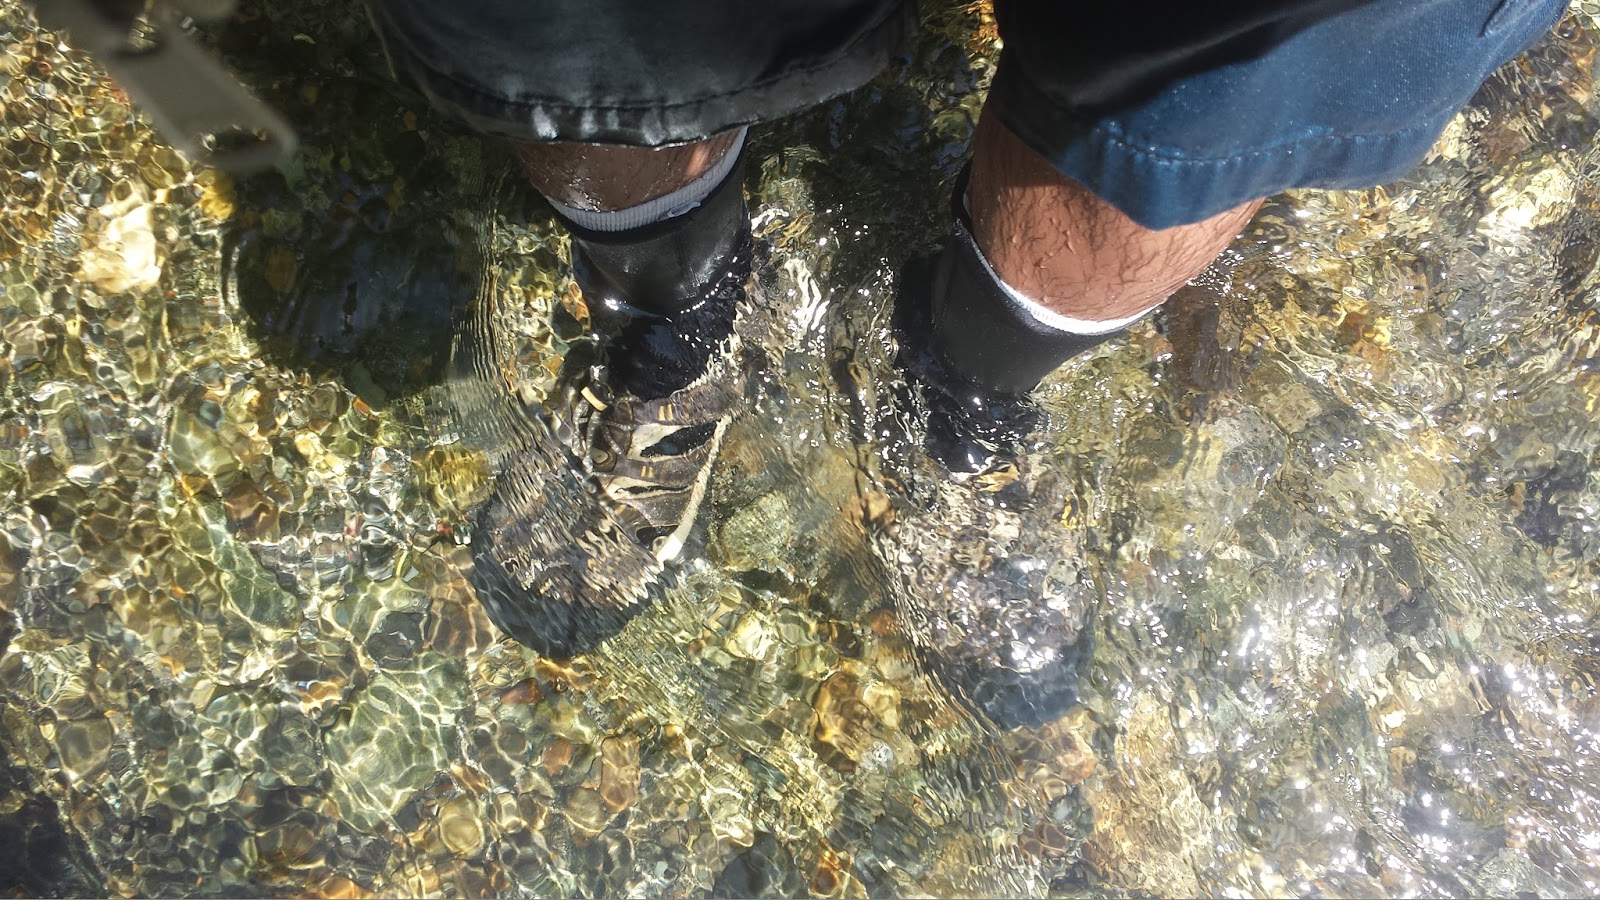 Wet Wading 101: How To Wet Wade Comfortably